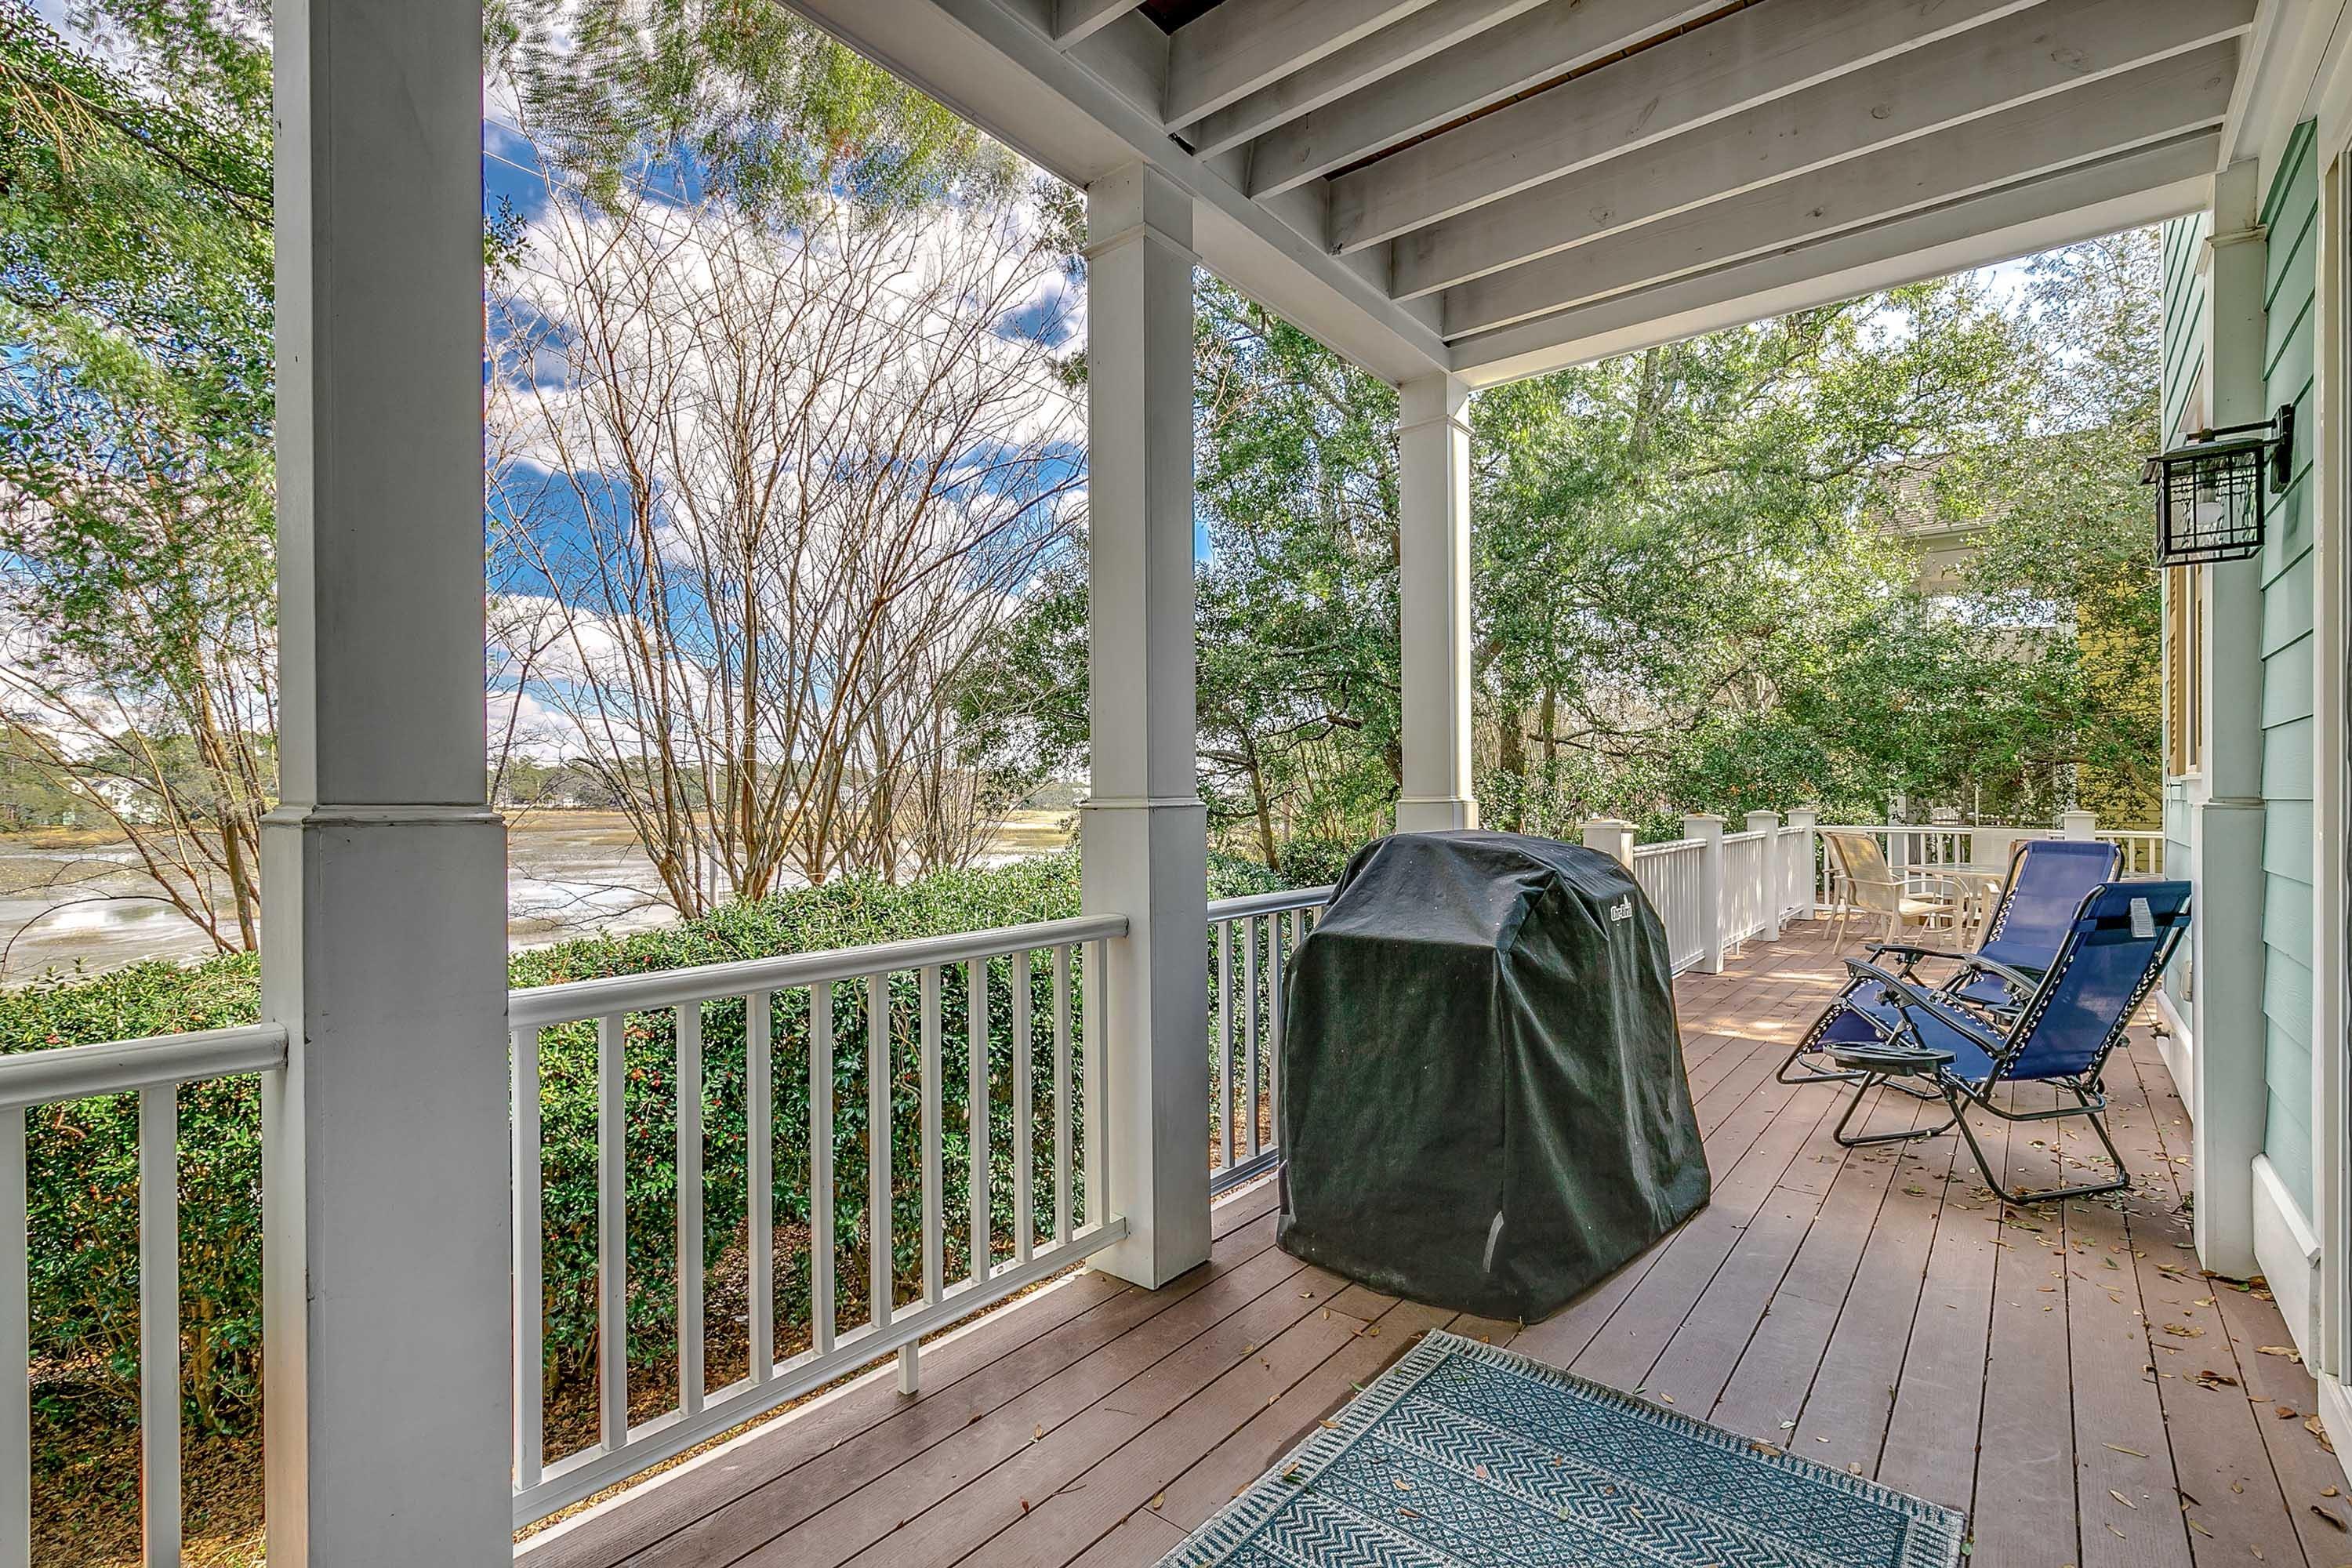 North Beach Cottages - 4 Bedroom Waccamaw Luxury Home